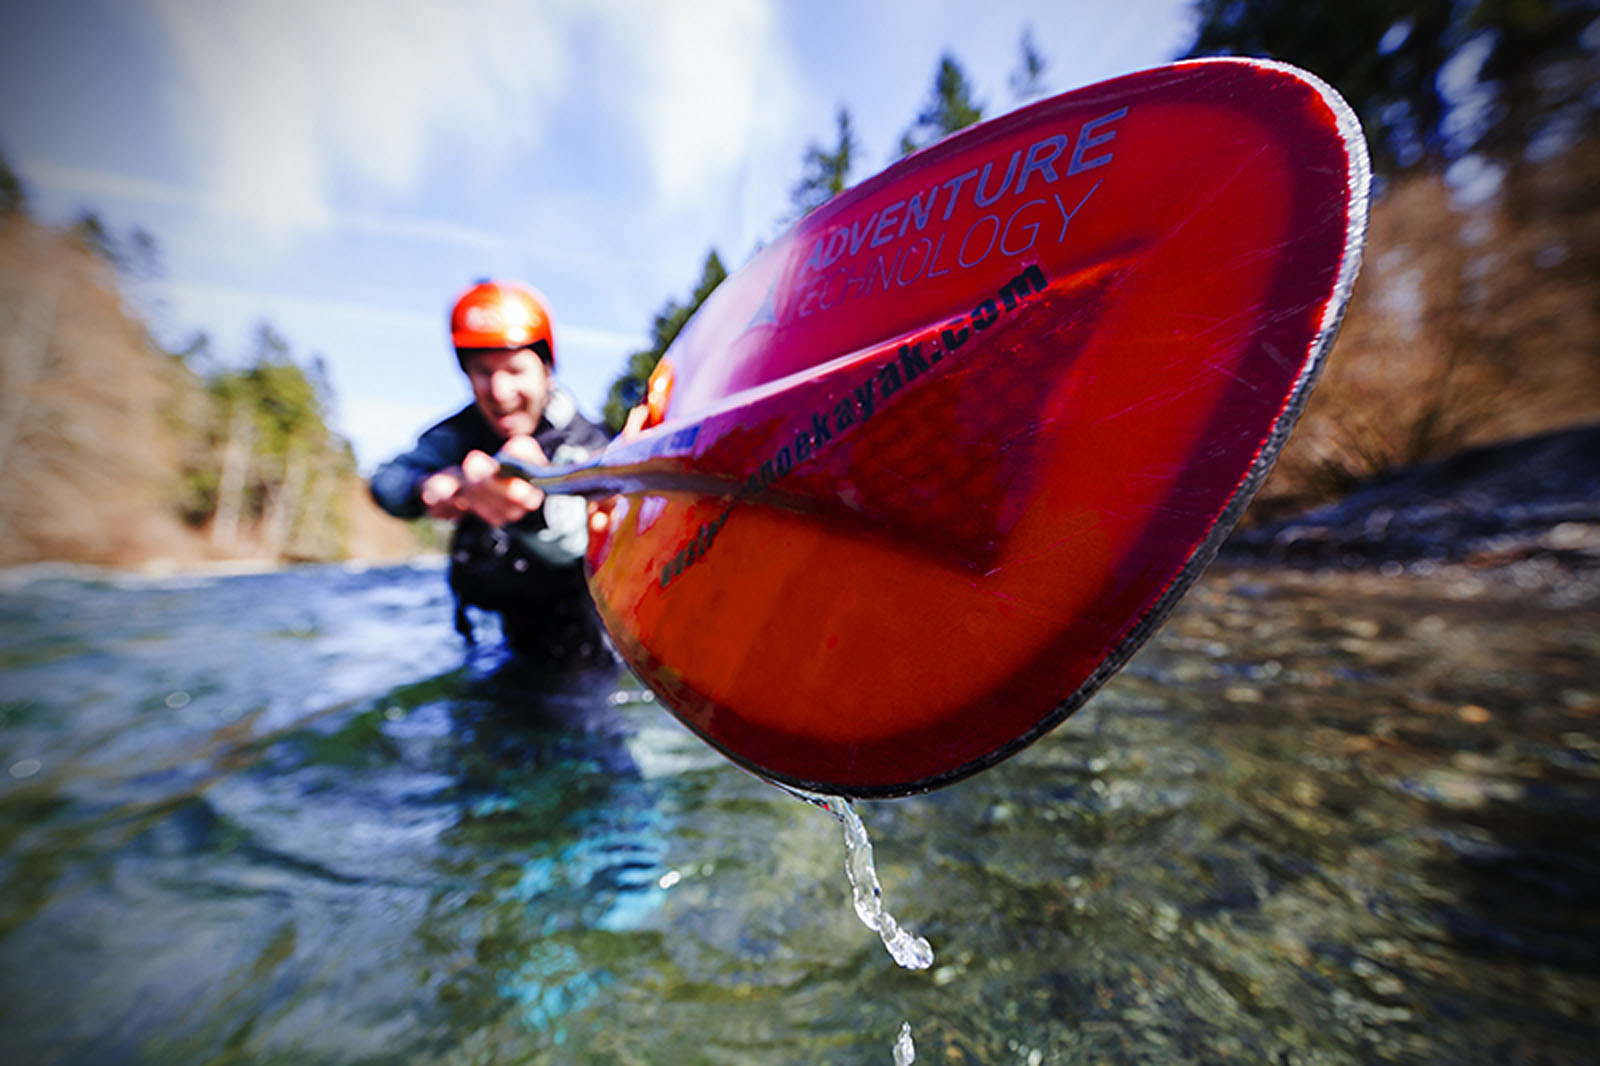 Kayaking on the Puntledge River, Comox Valley